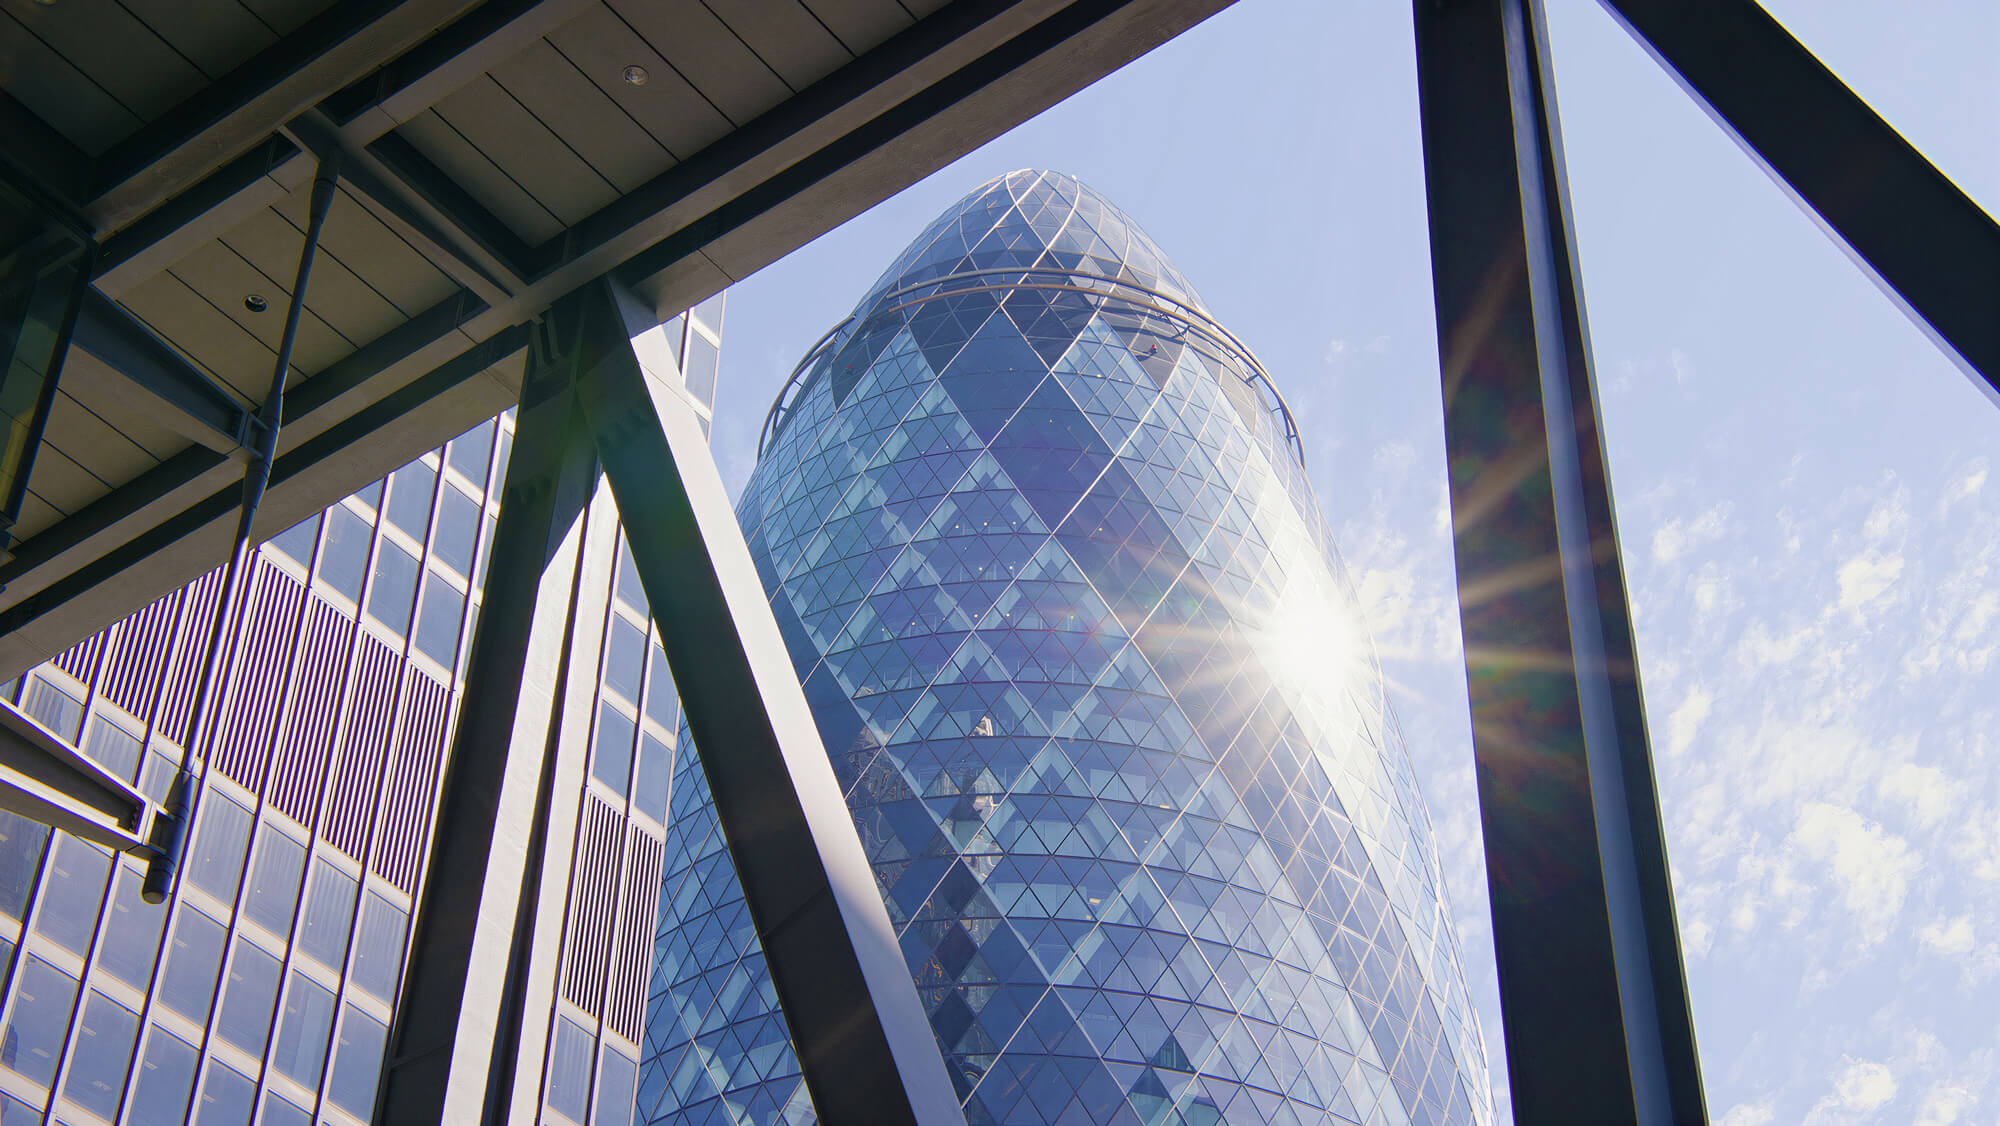 A shot looking up through a Leadenhall Building window at The Gherkin, from the Rise Media case studies archive